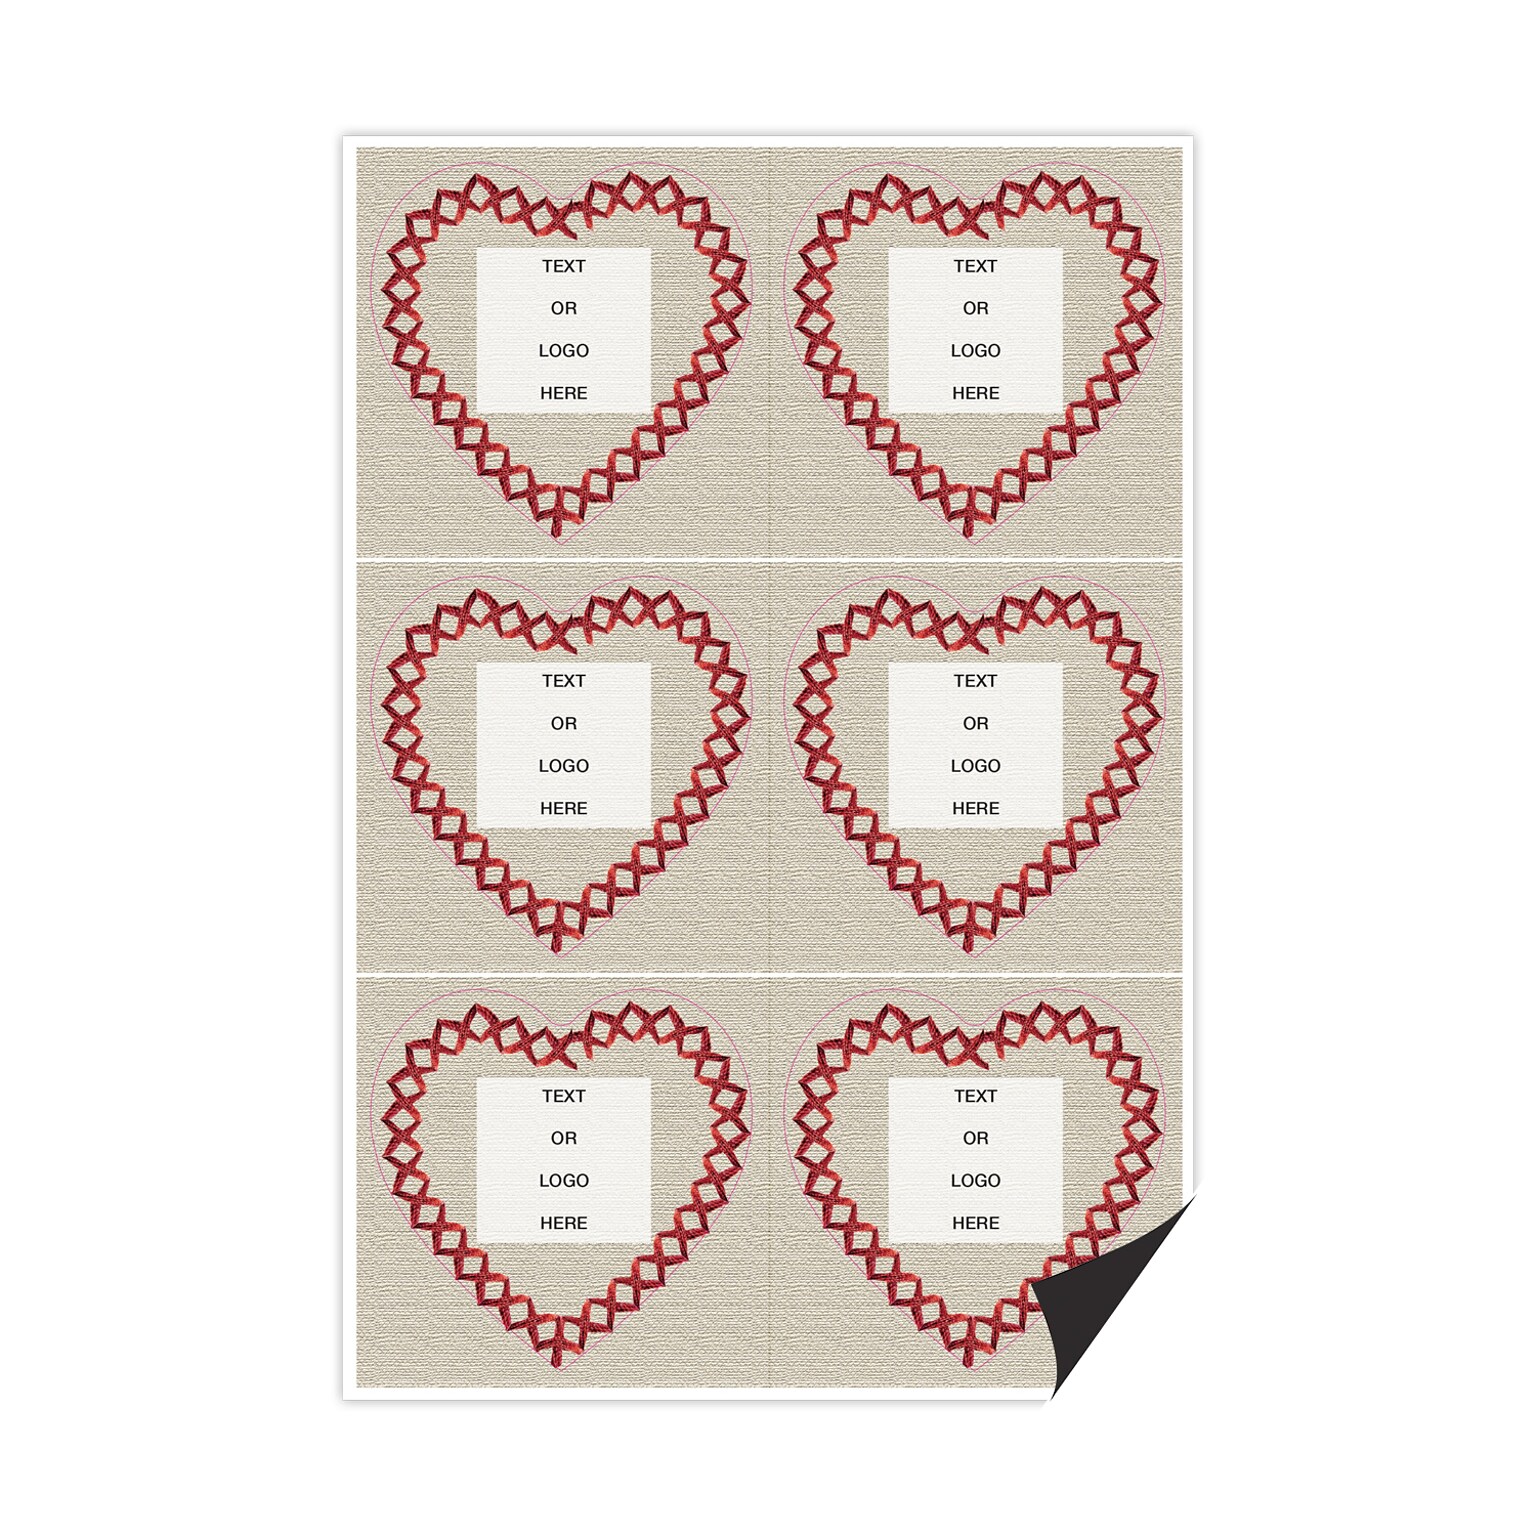 Custom Full Color Heart Shaped Magnets, 30 mil. Magnetic stock, 6-Perforated Magnets per Sheet, 3 x 3